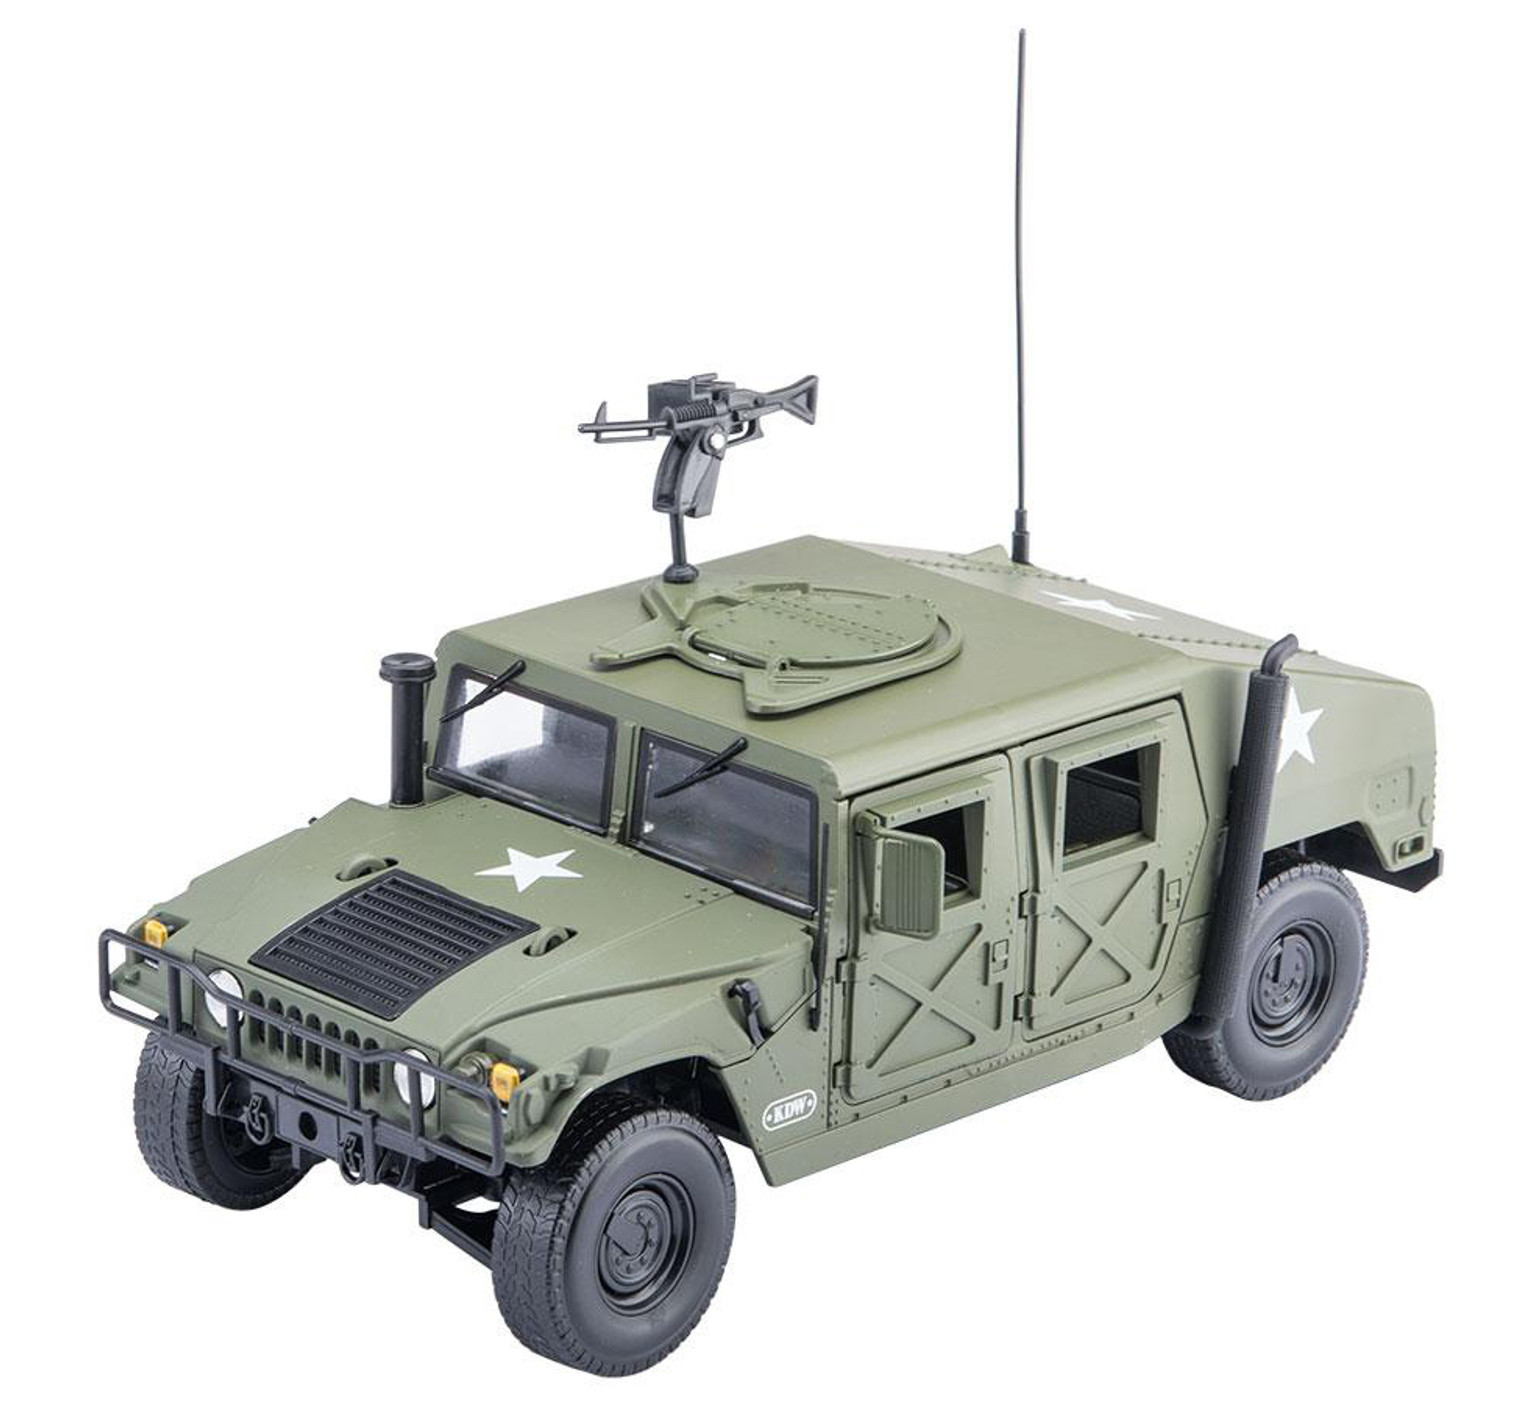 1:18 Scale RC Fully Articulated Toy Humvee